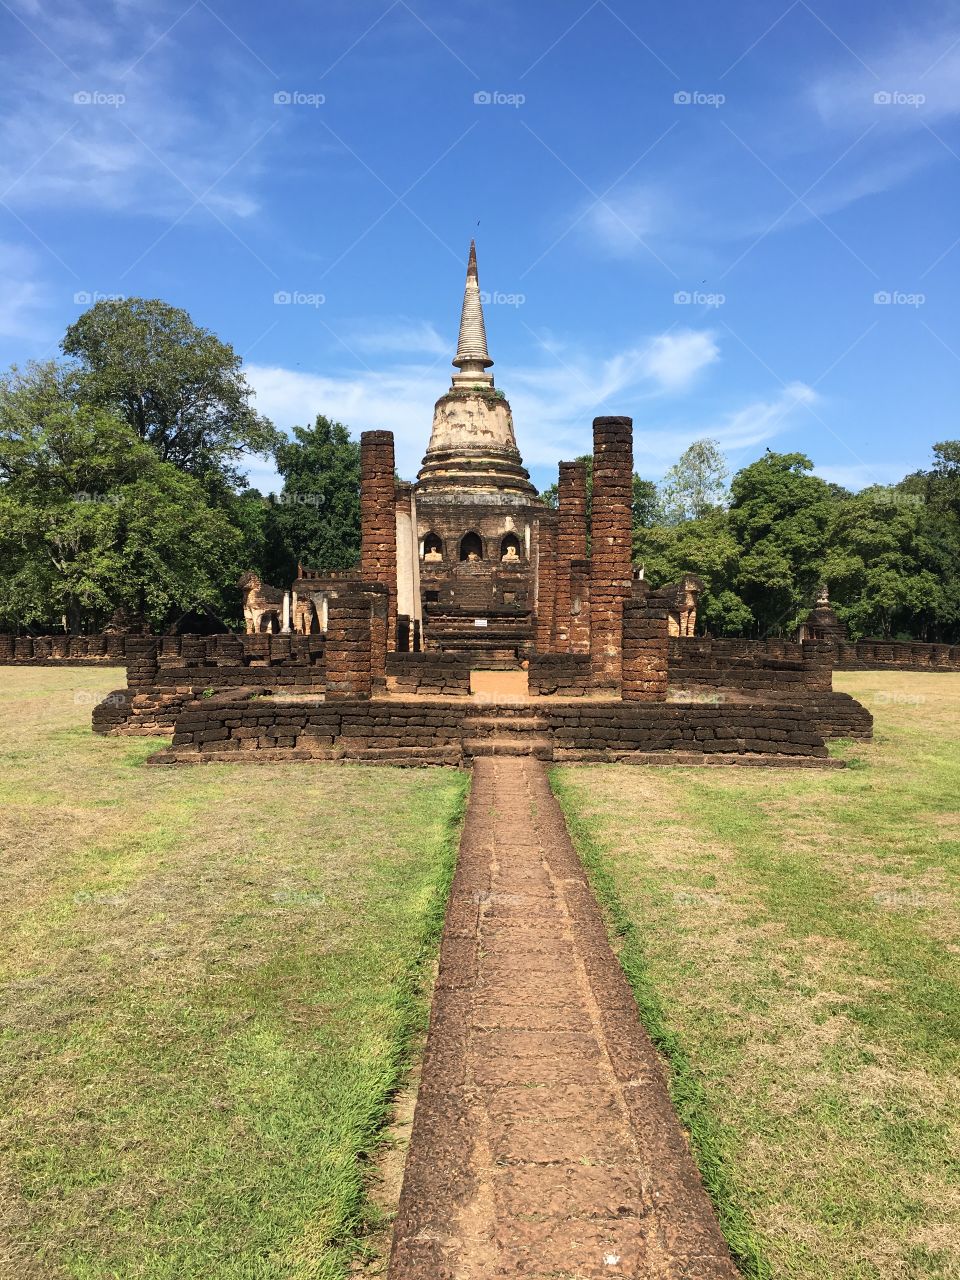 Wat chang lom elephant temple in Sukhothai, Thailand 